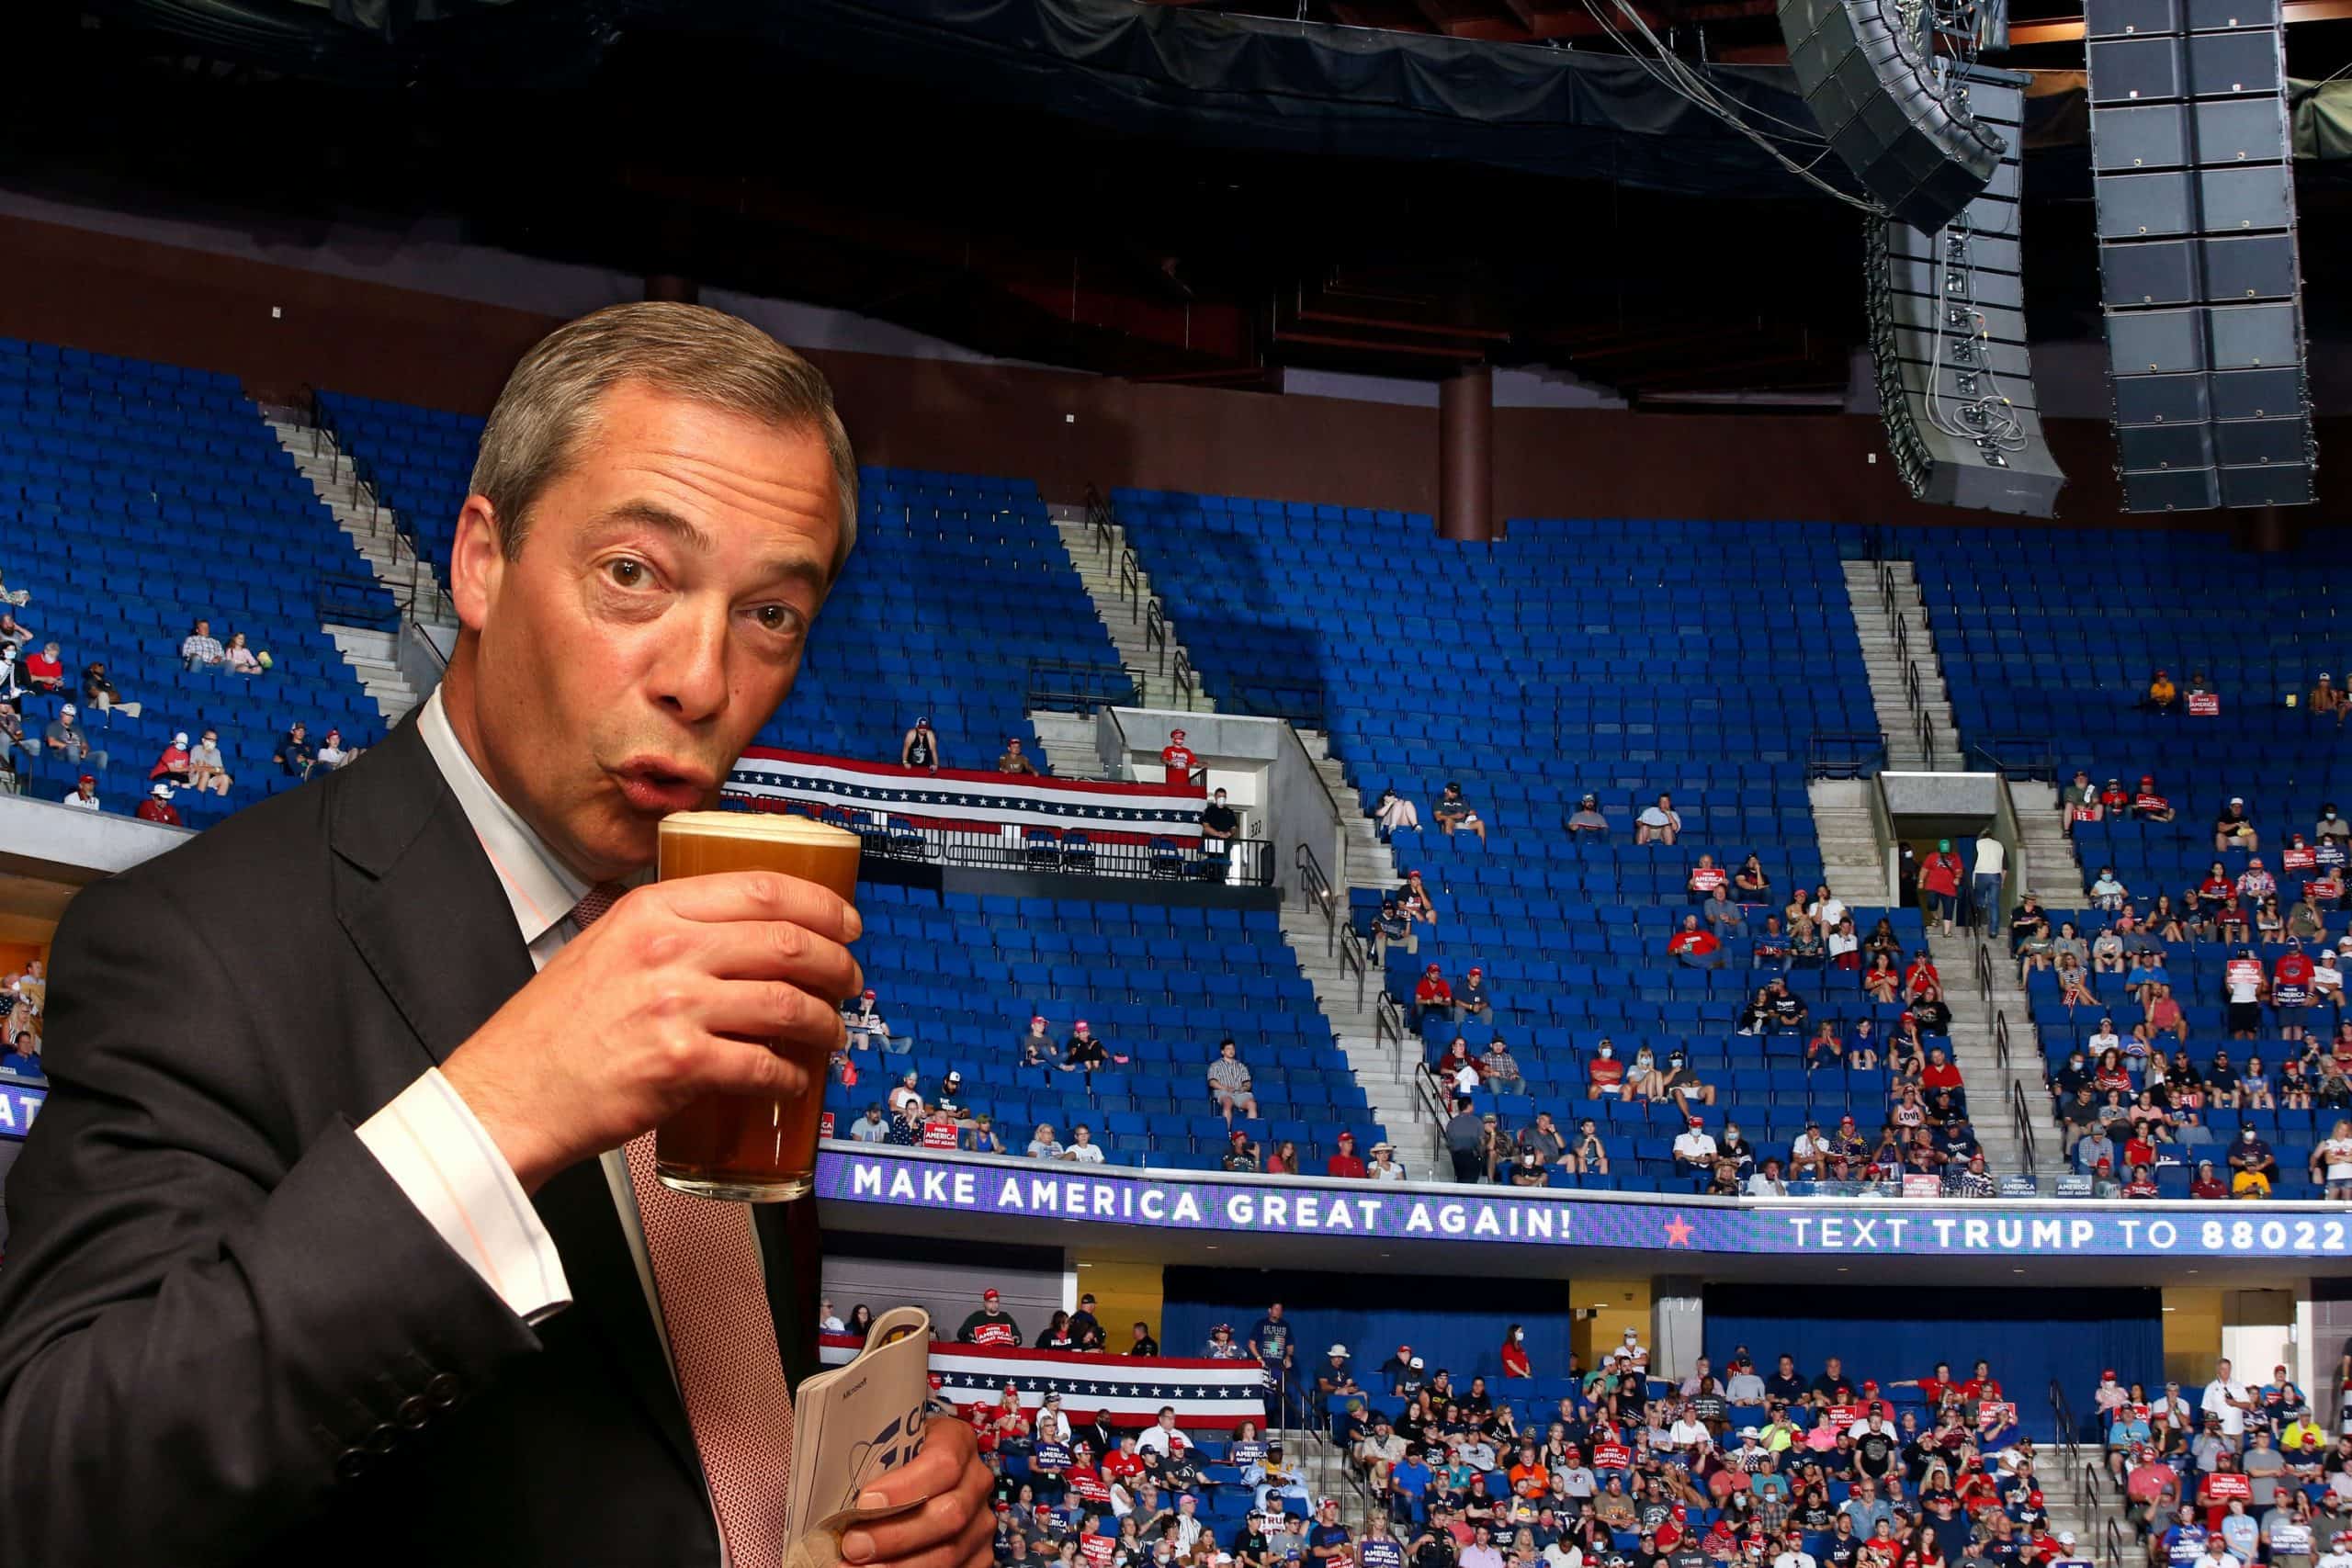 Farage flouts travel ban to attend Trump rally flop